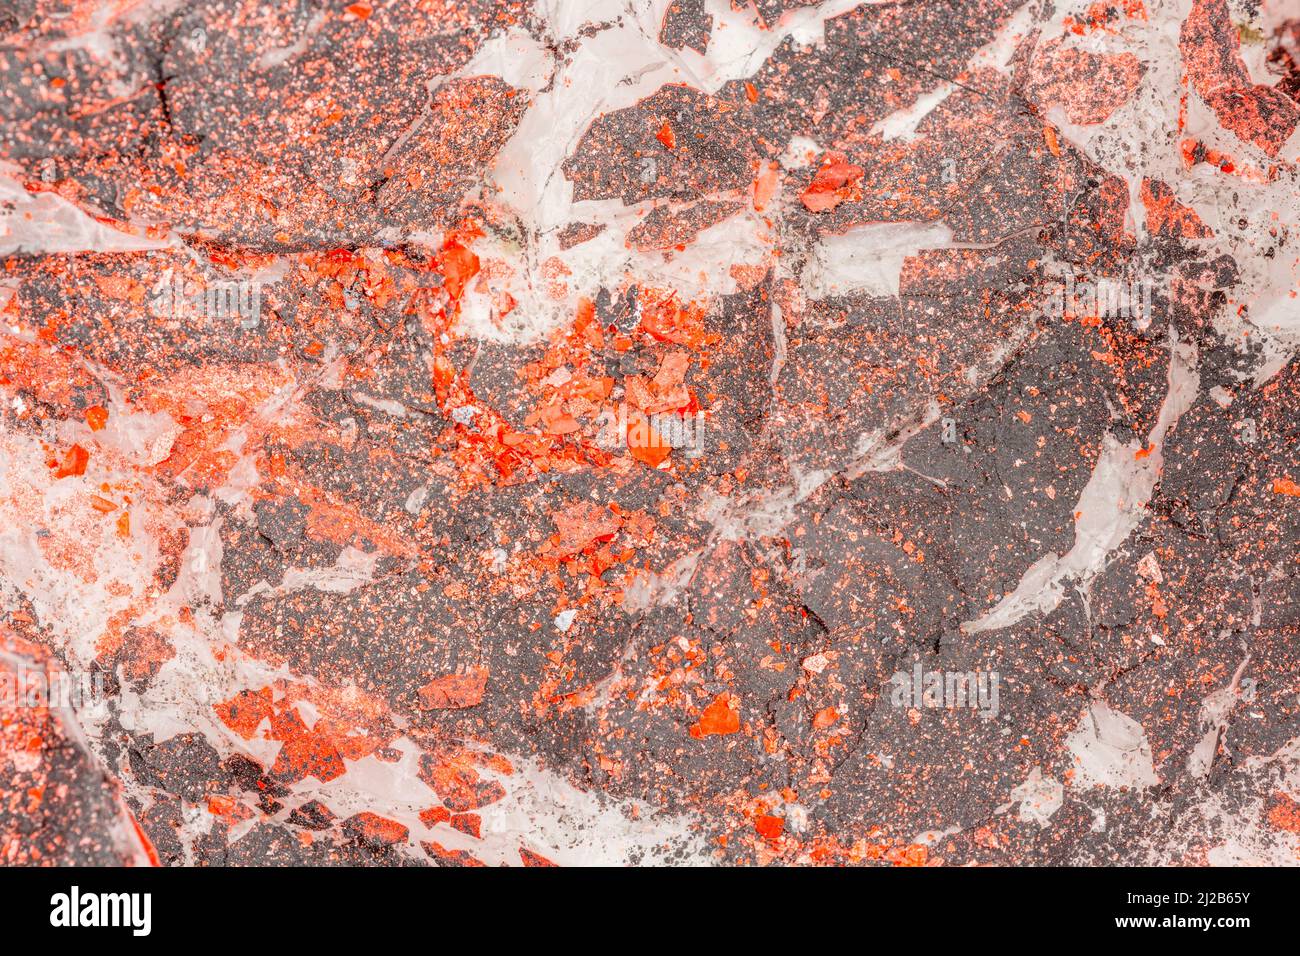 Crafter or artists dust sheet covered by flaking, sprayed, orange and black paint. For DIY paint job, peeling paint, making a mess of things. Stock Photo